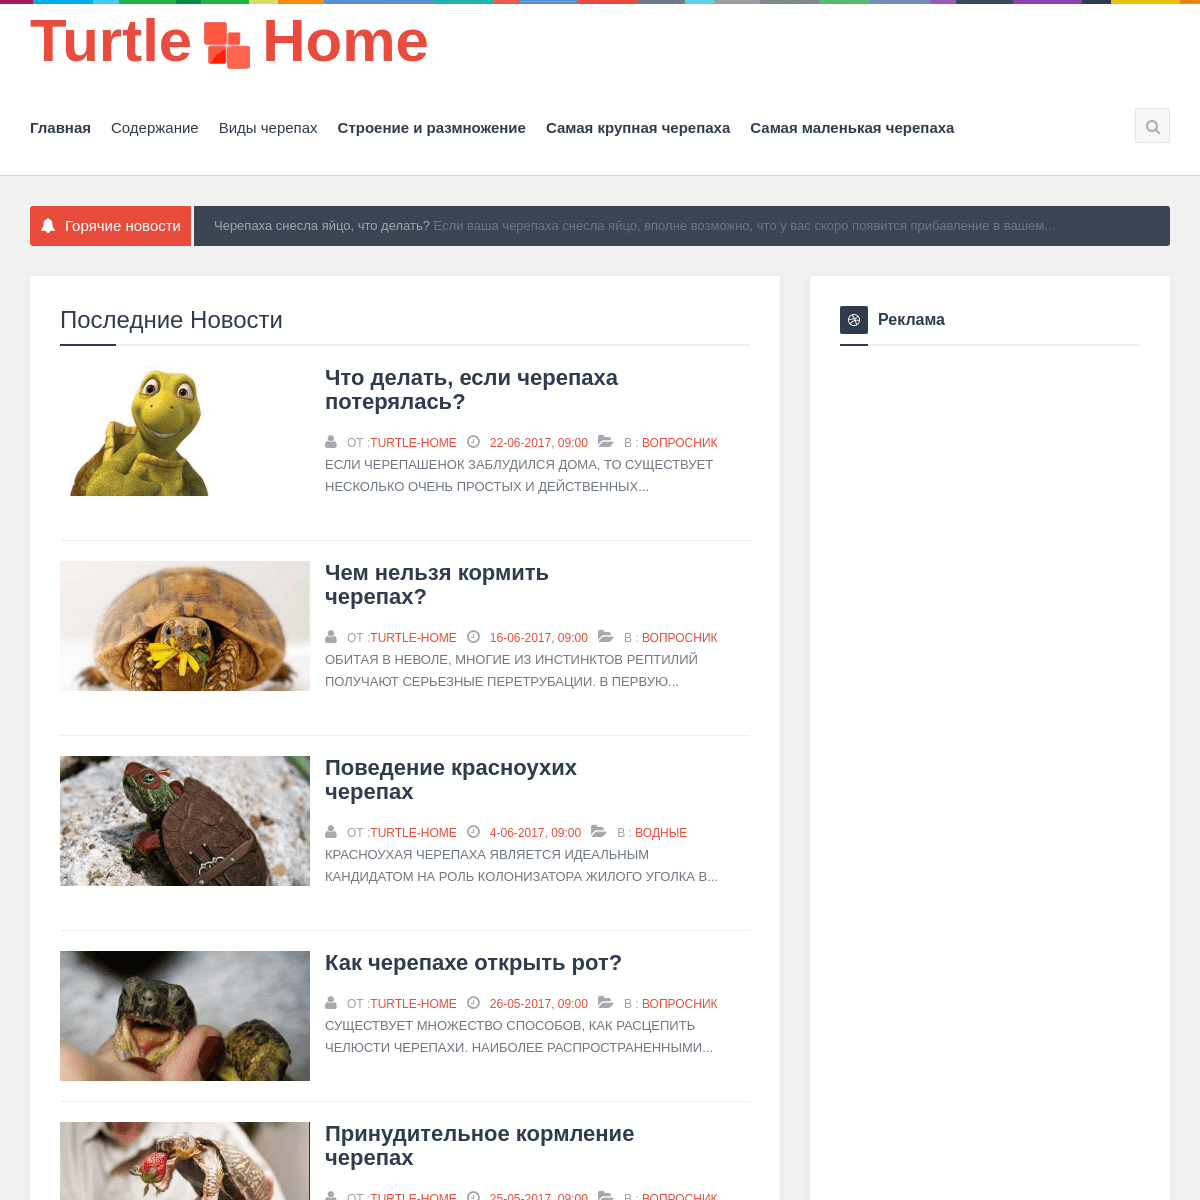 A complete backup of turtle-home.net